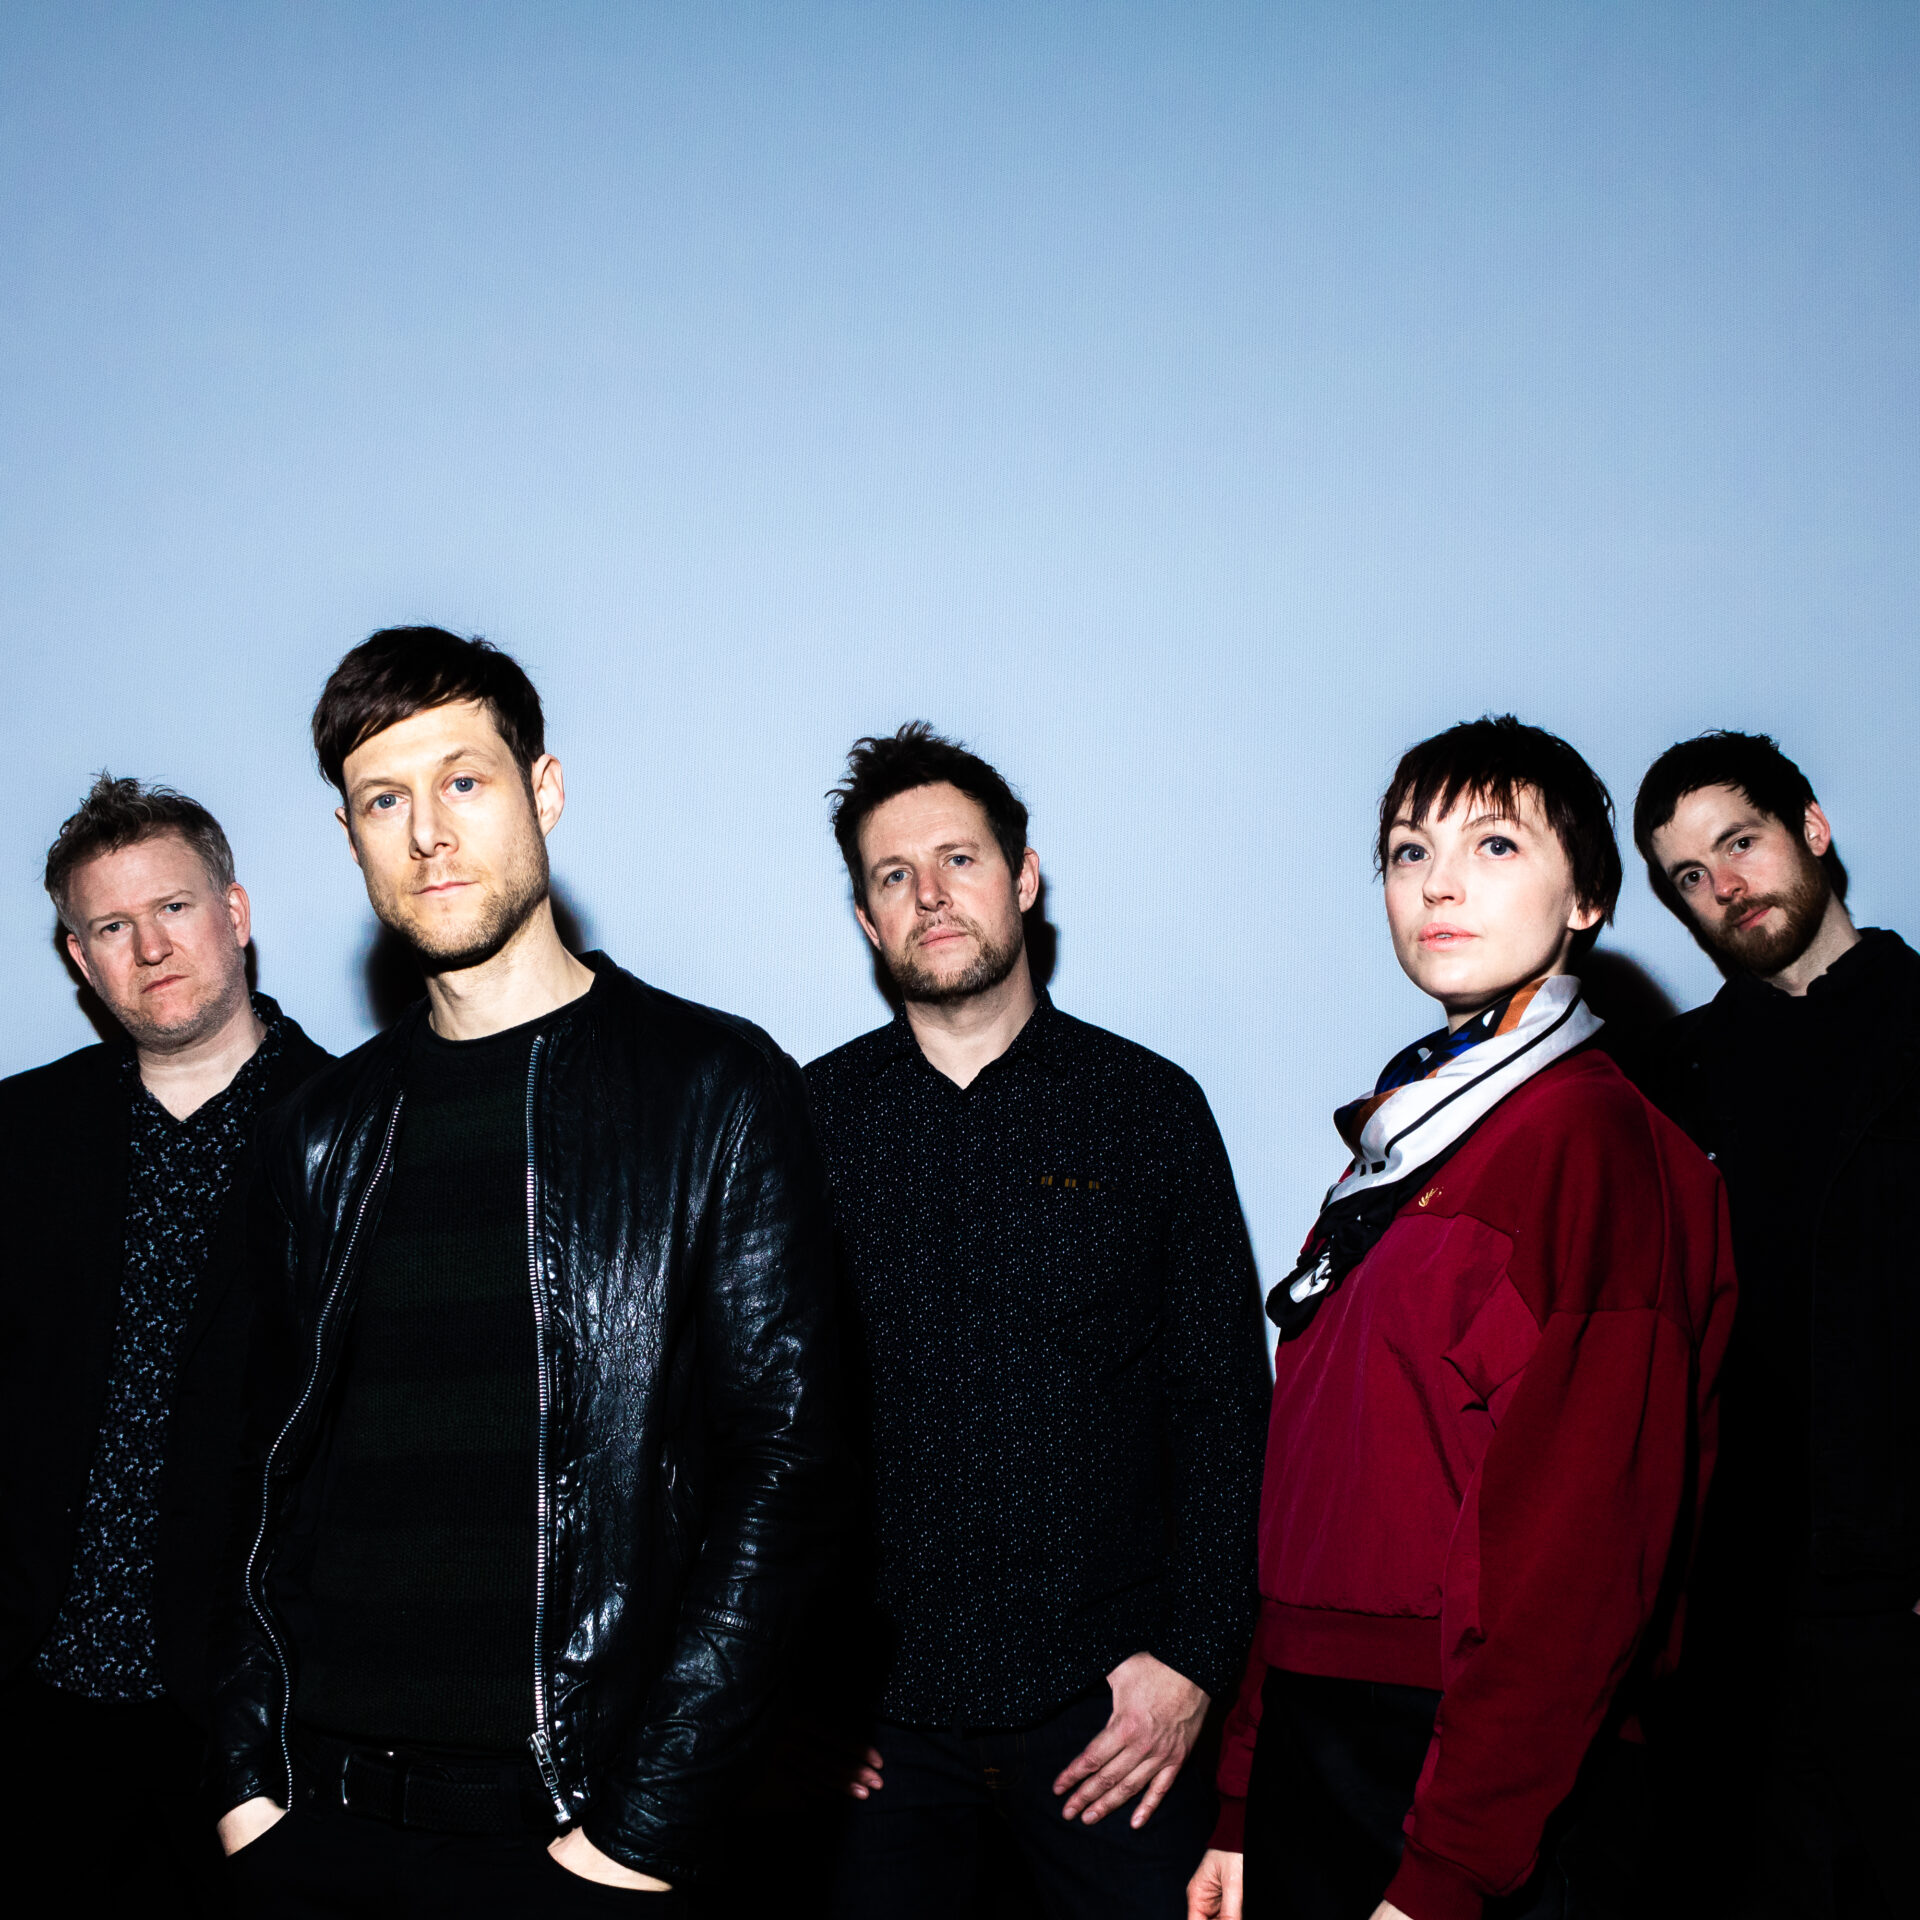 NEWS: Sea Fever reveal video for ominous electro pop single 'Crossed Wires' 2